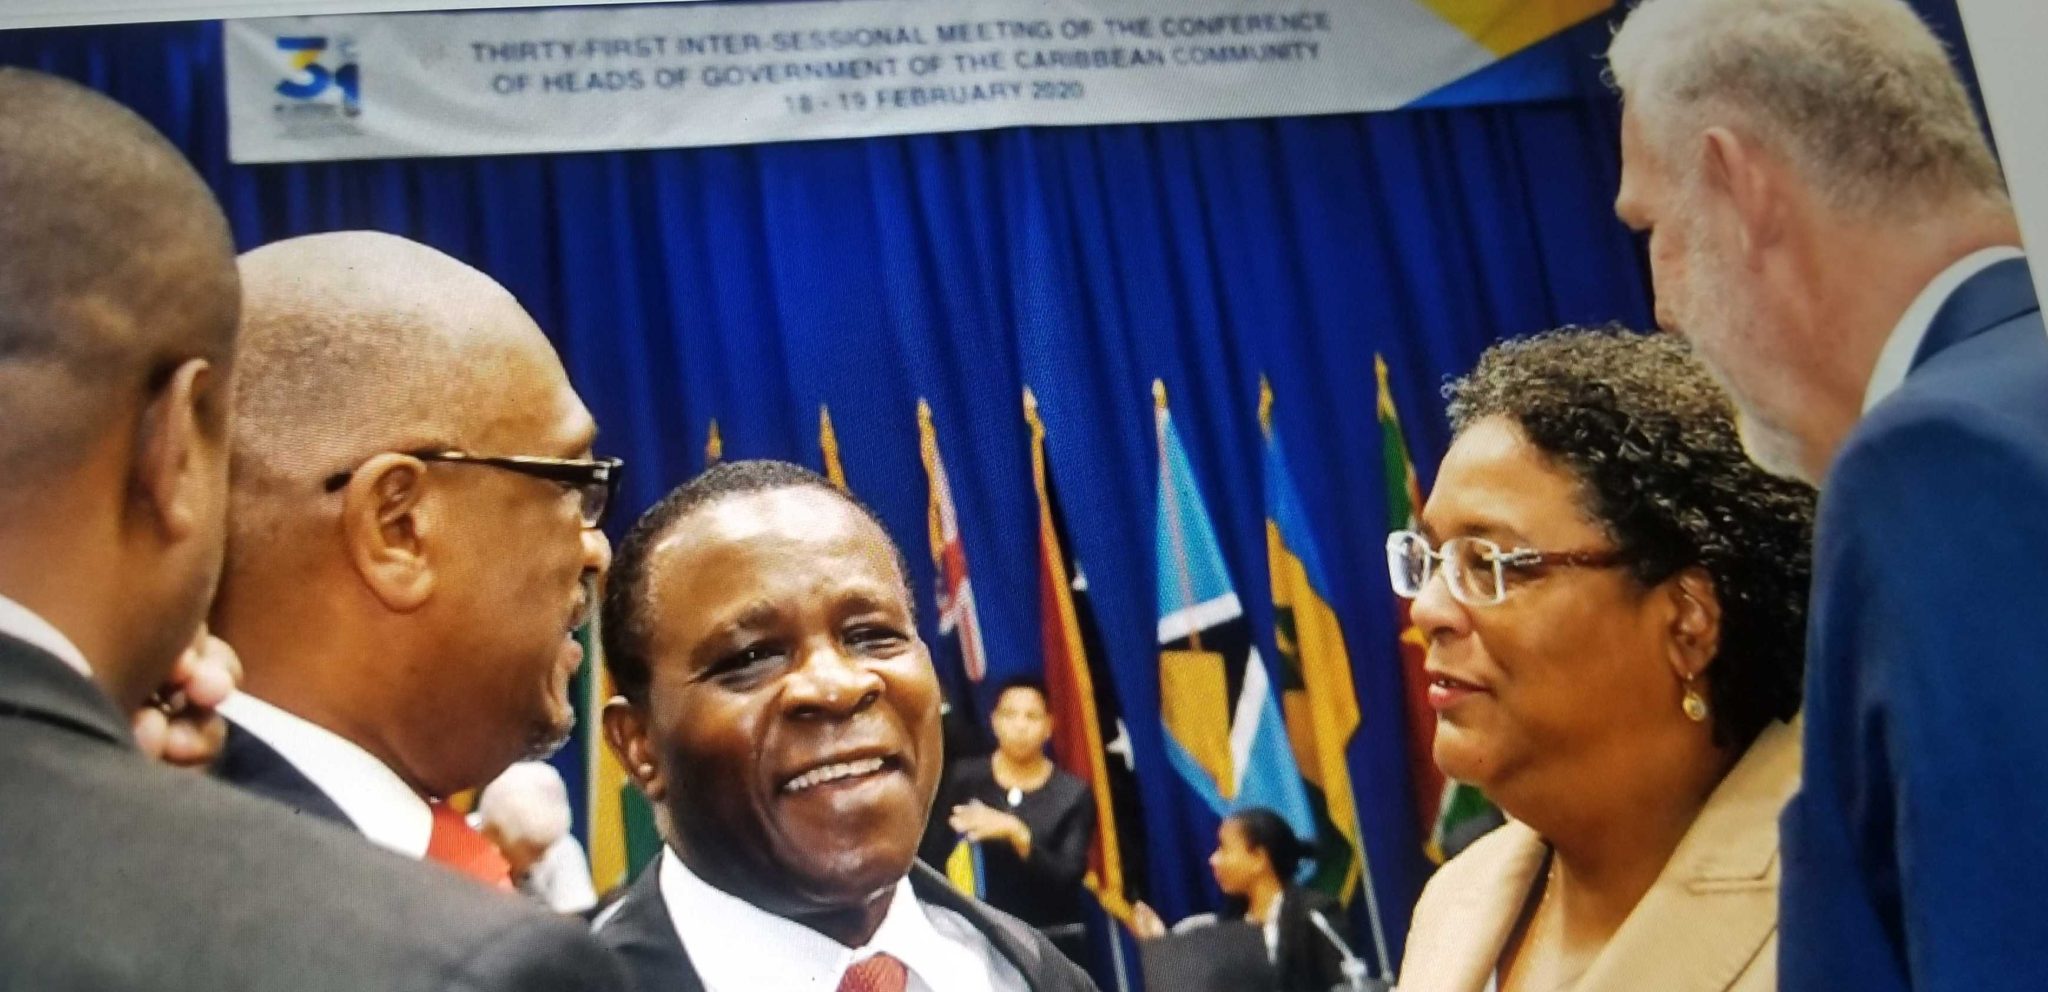  A fixed single CARICOM roaming rate for all CARICOM Nationals